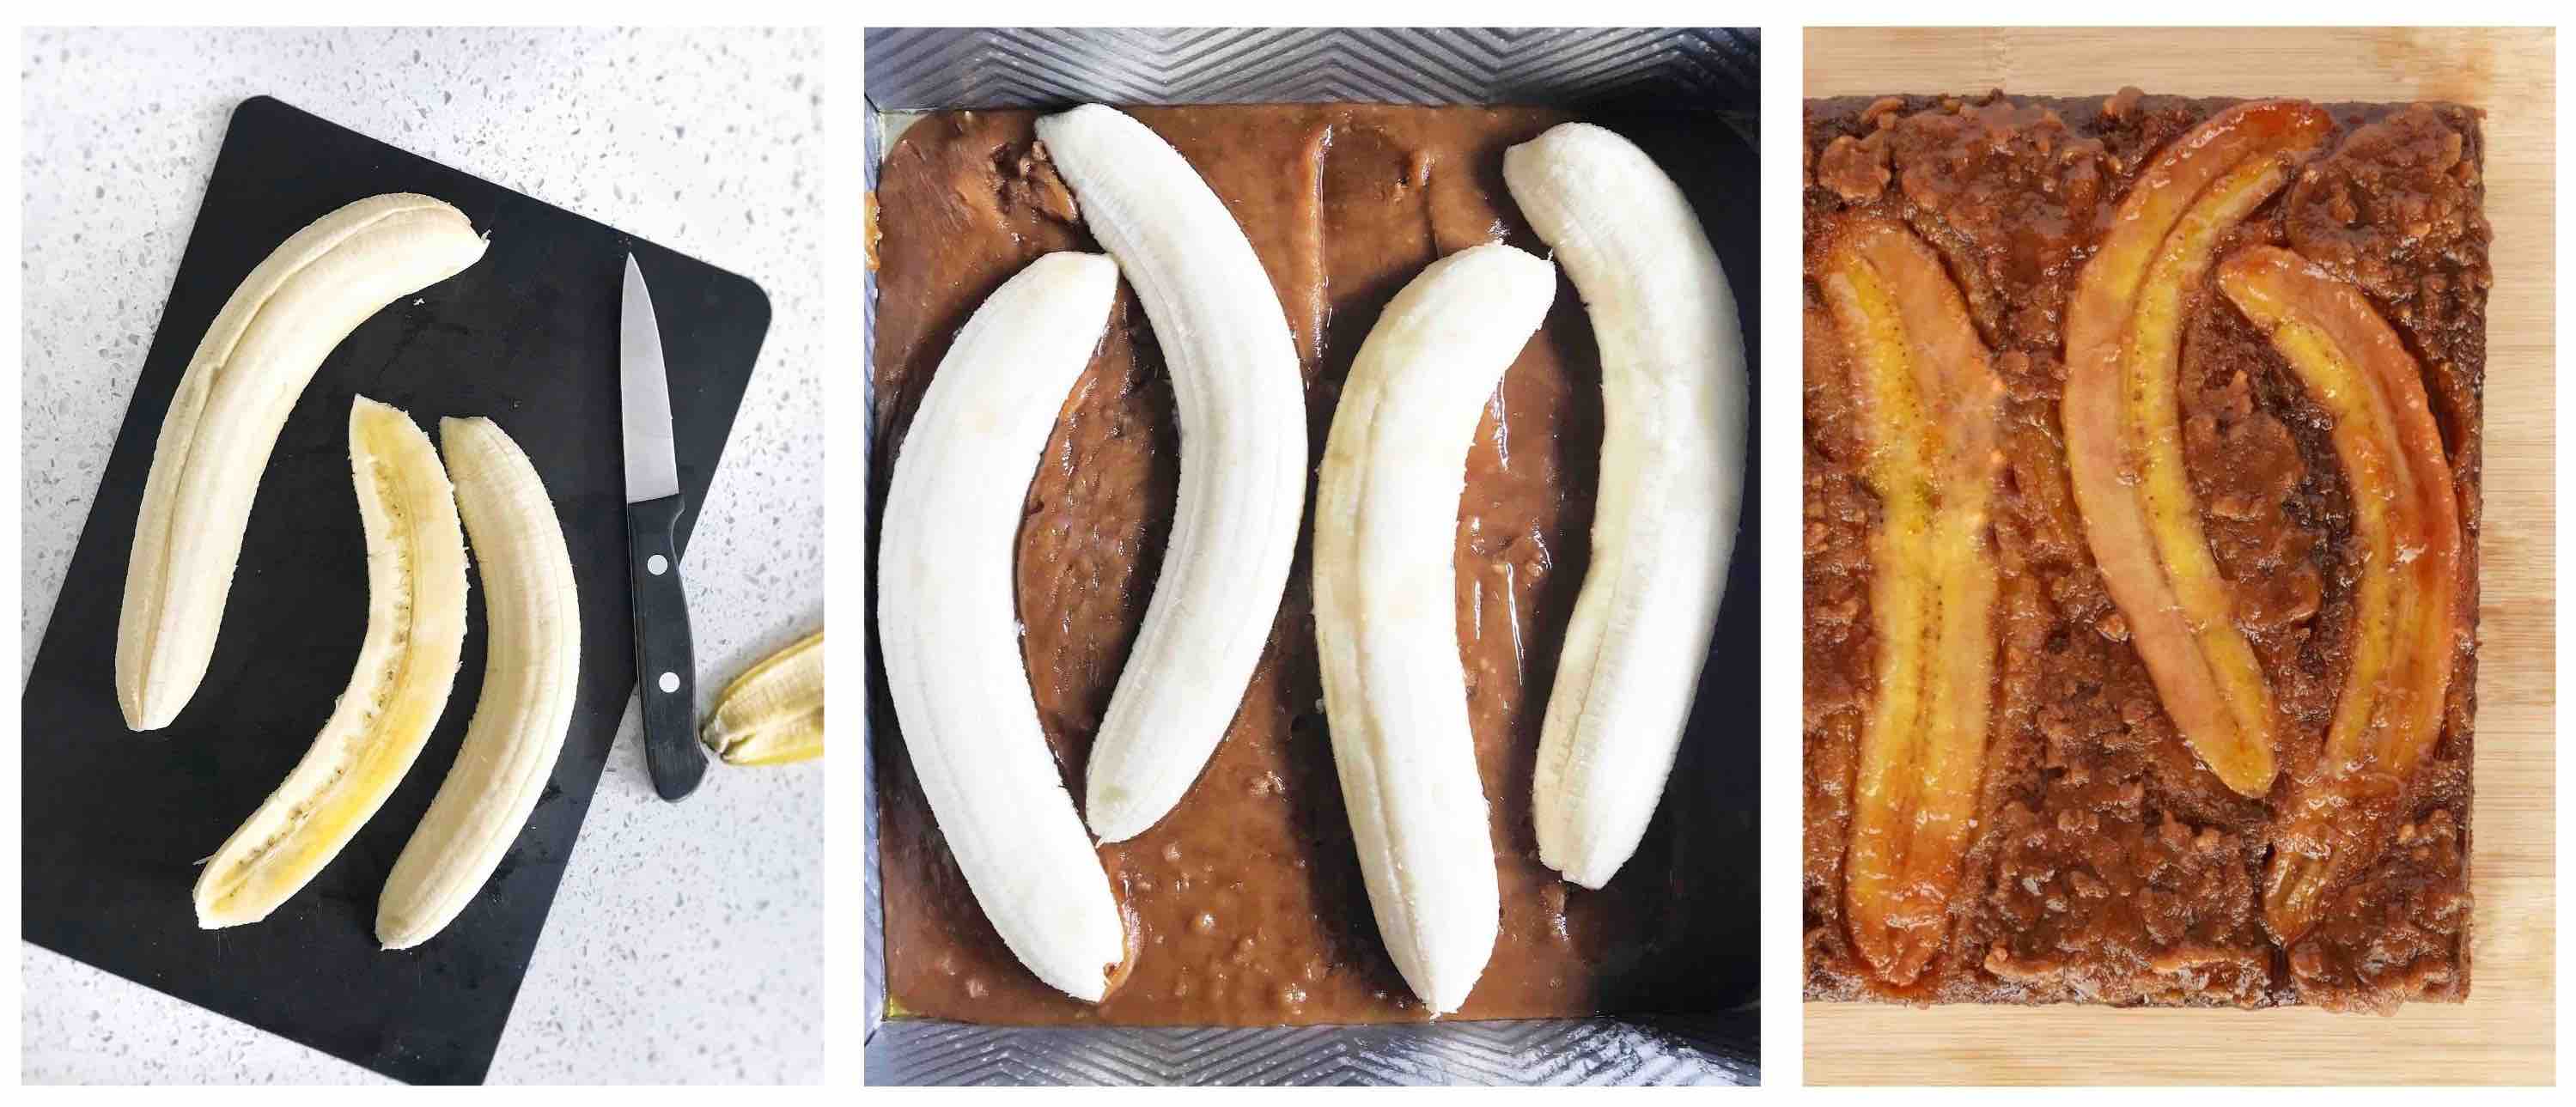 3 images, showing how to slice bananas long ways and arrange in caramel in bottom of pan